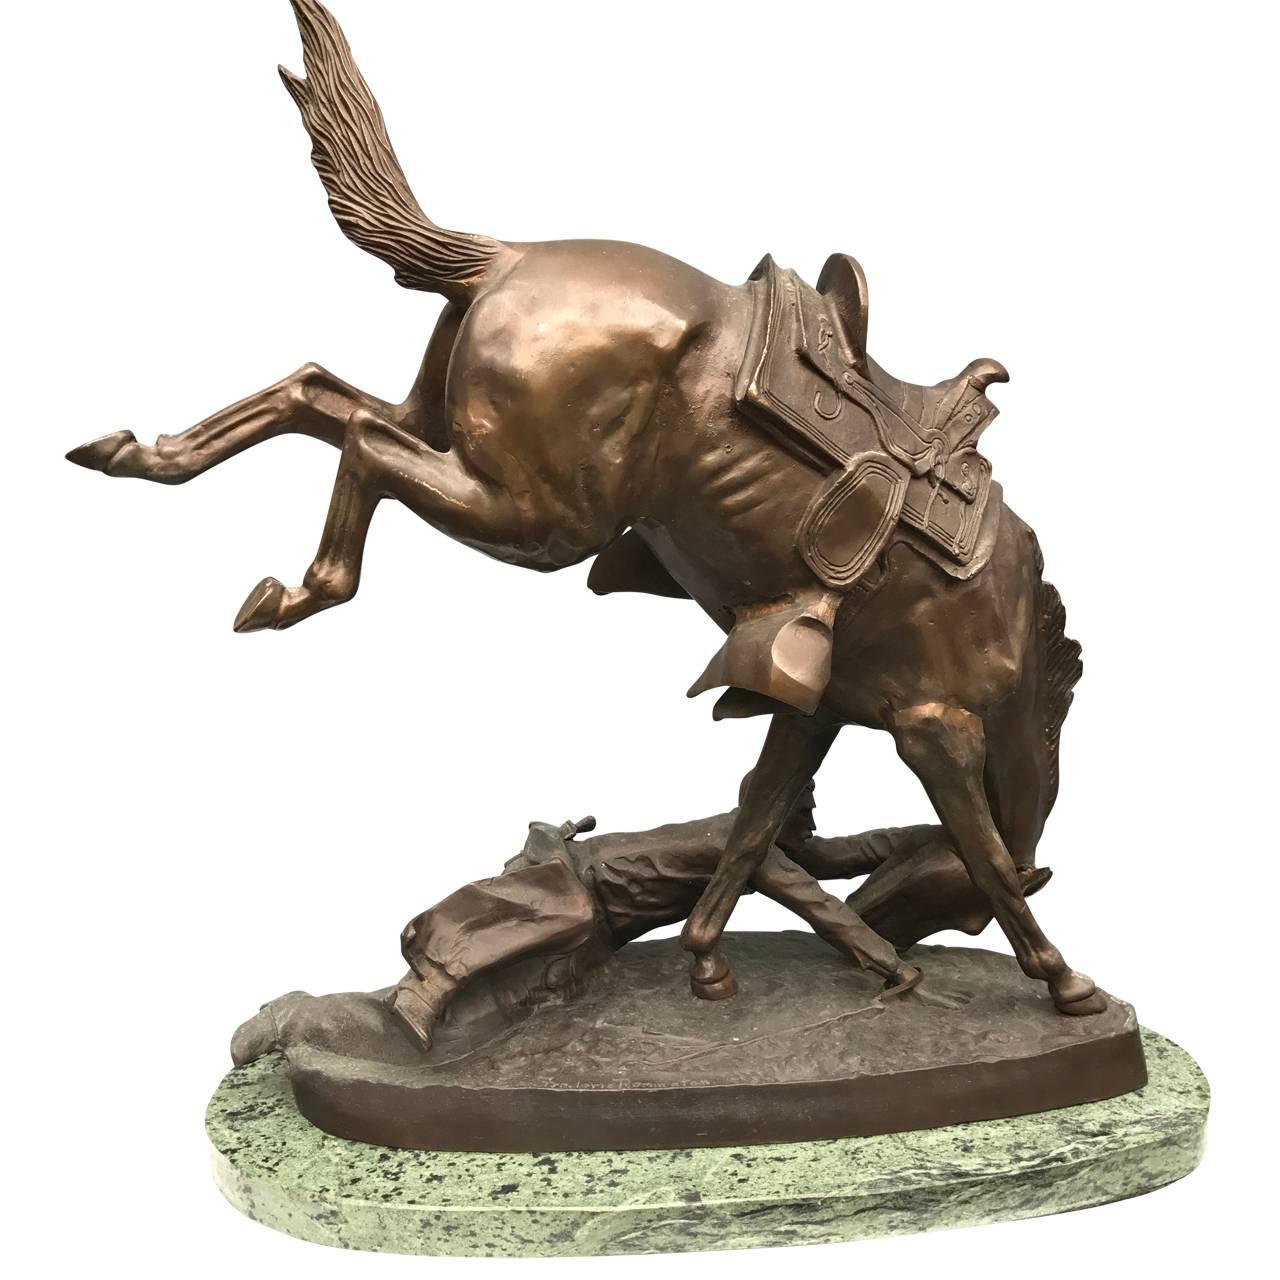 Bronze sculpture of The Wicked Pony, western cowboy by Frederic Remington on a oval marble base, Signed.

$125 flat rate front door delivery includes Washington DC metro, Baltimore and Philadelphia